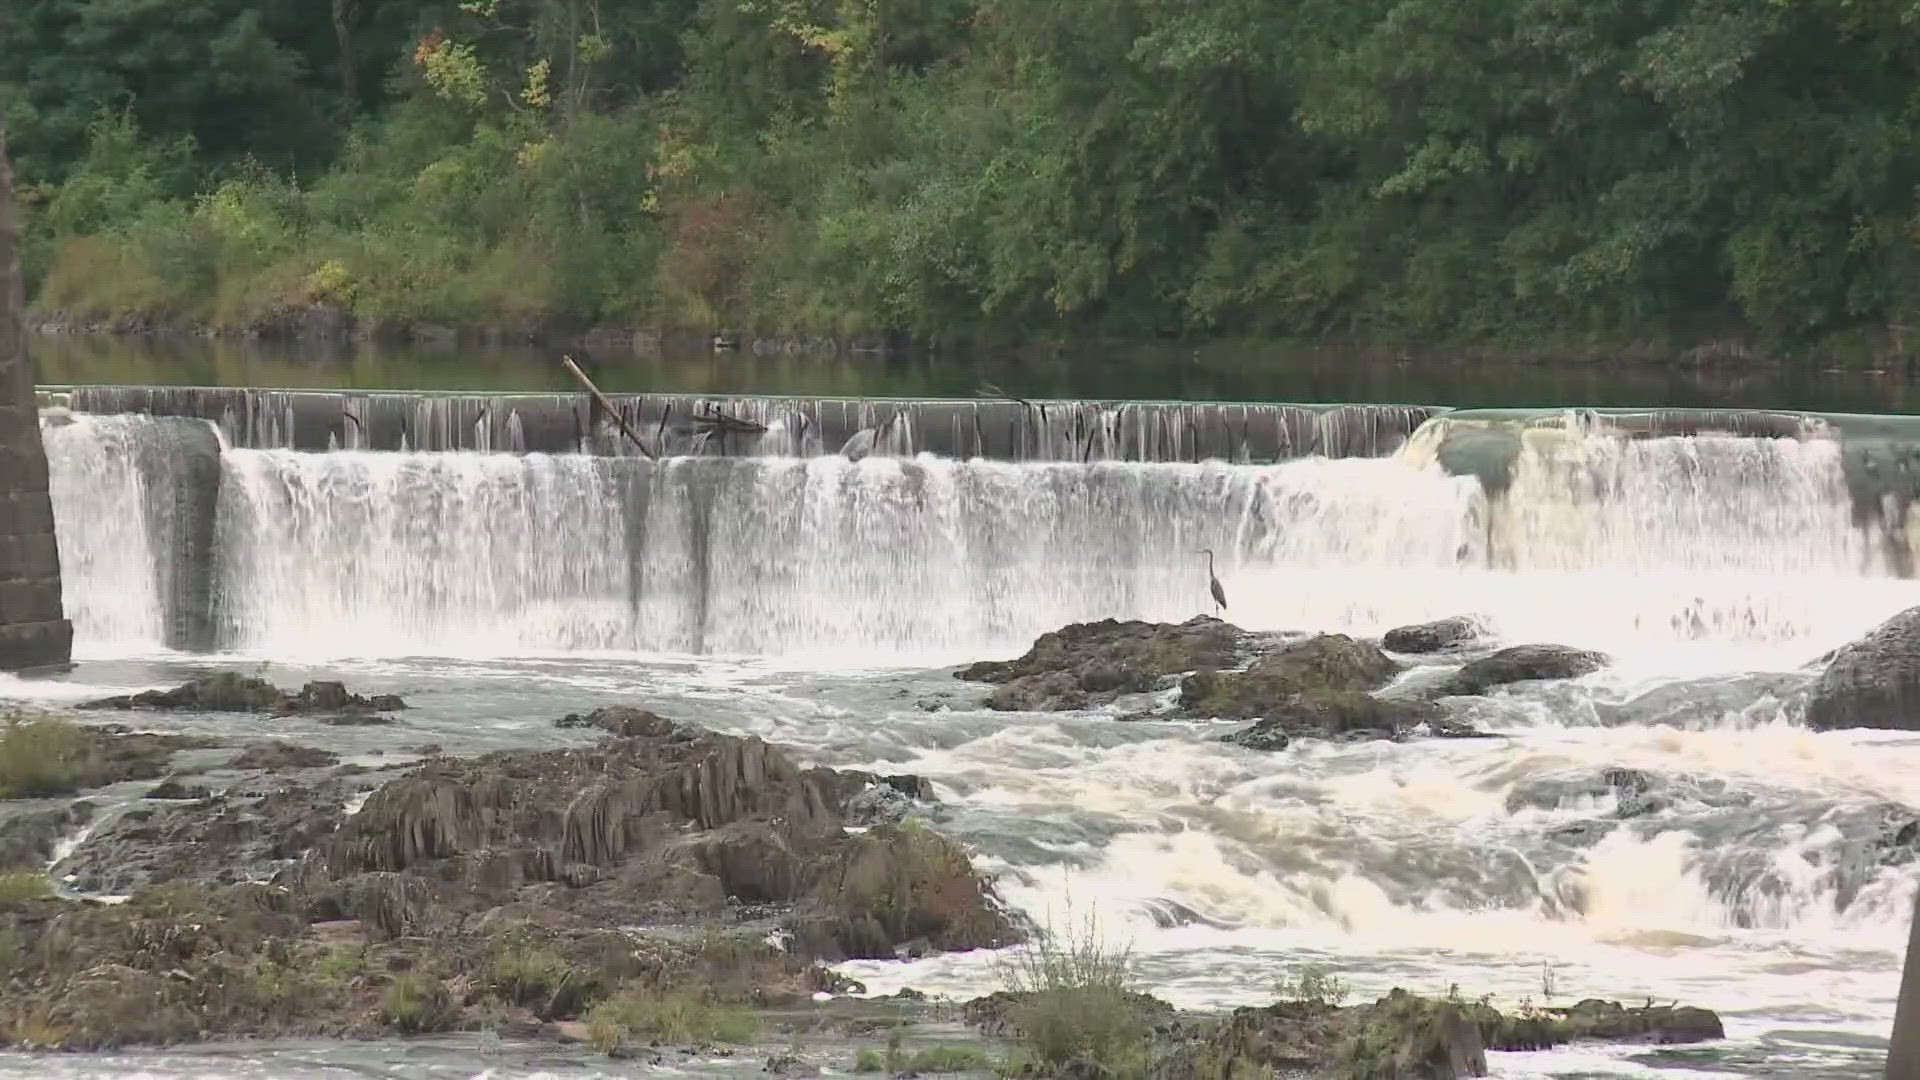 Environmental groups in Maine are criticizing a new federal report that says a group of dams on the Kennebec River are not putting fish populations at risk.